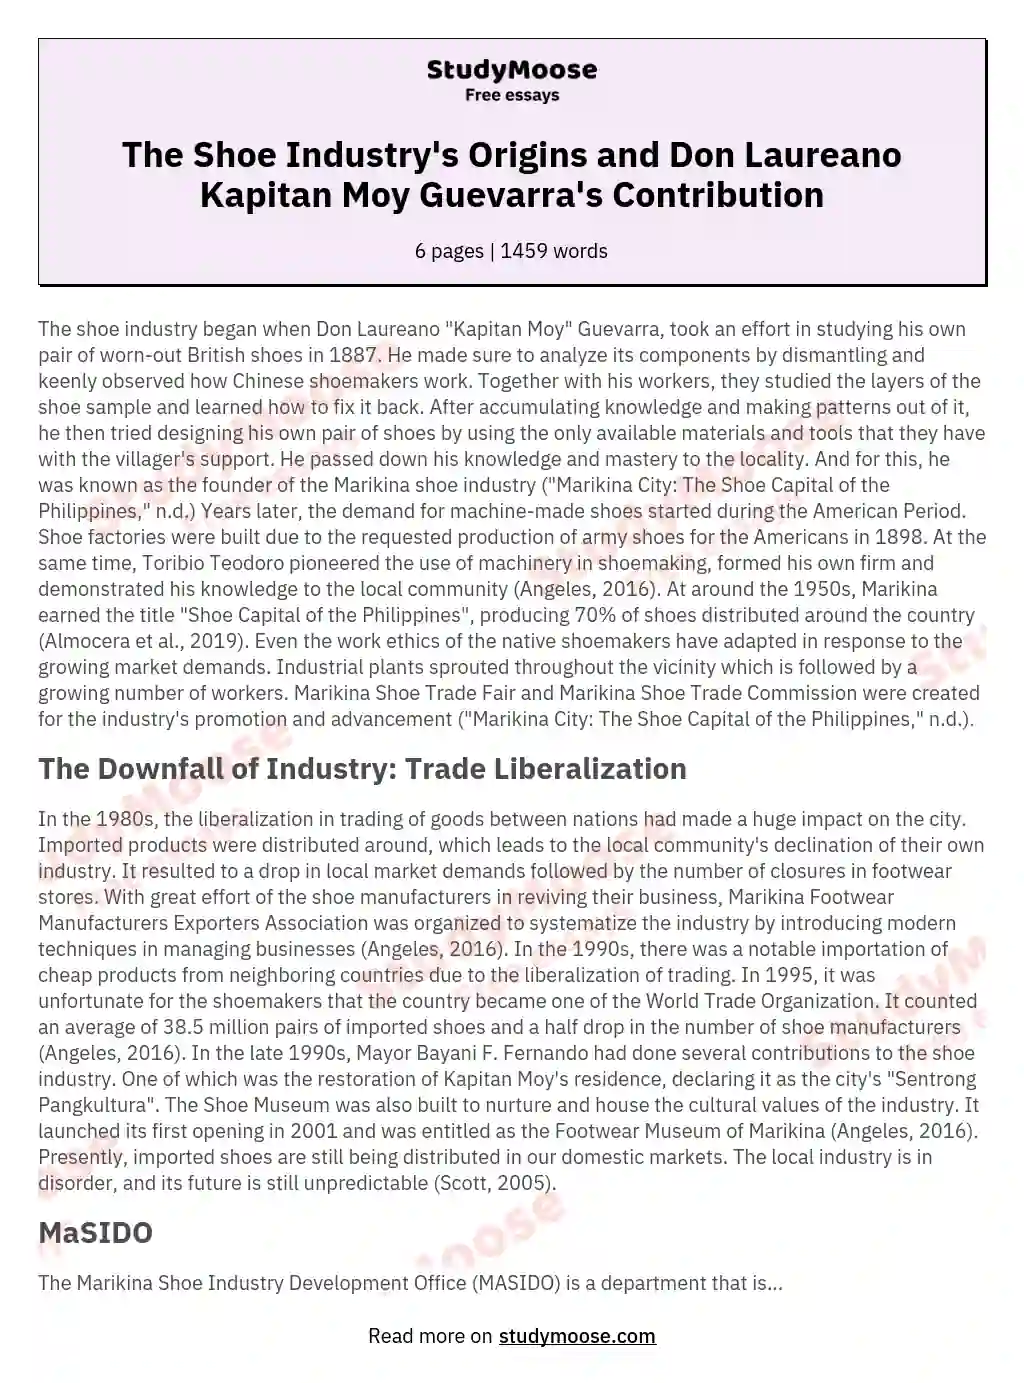 The Shoe Industry's Origins and Don Laureano Kapitan Moy Guevarra's Contribution essay